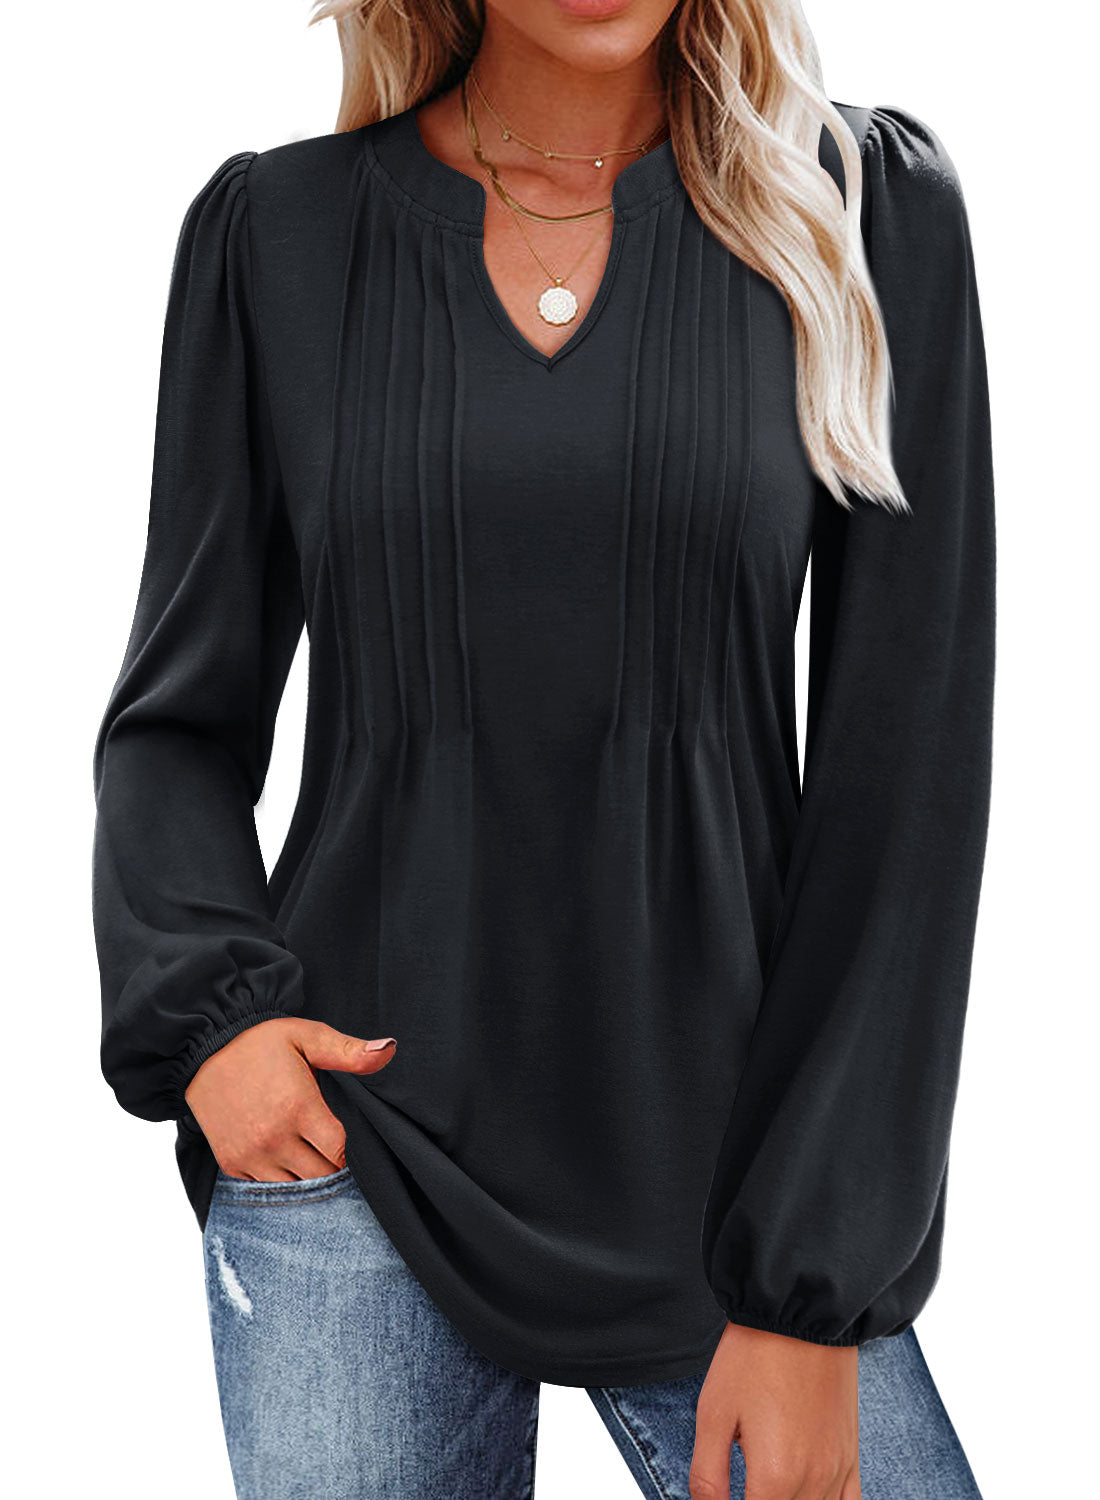 MIHOLL Women's V Neck Puff Long Sleeve T Shirts Pleated Casual Loose Tunic Blouse